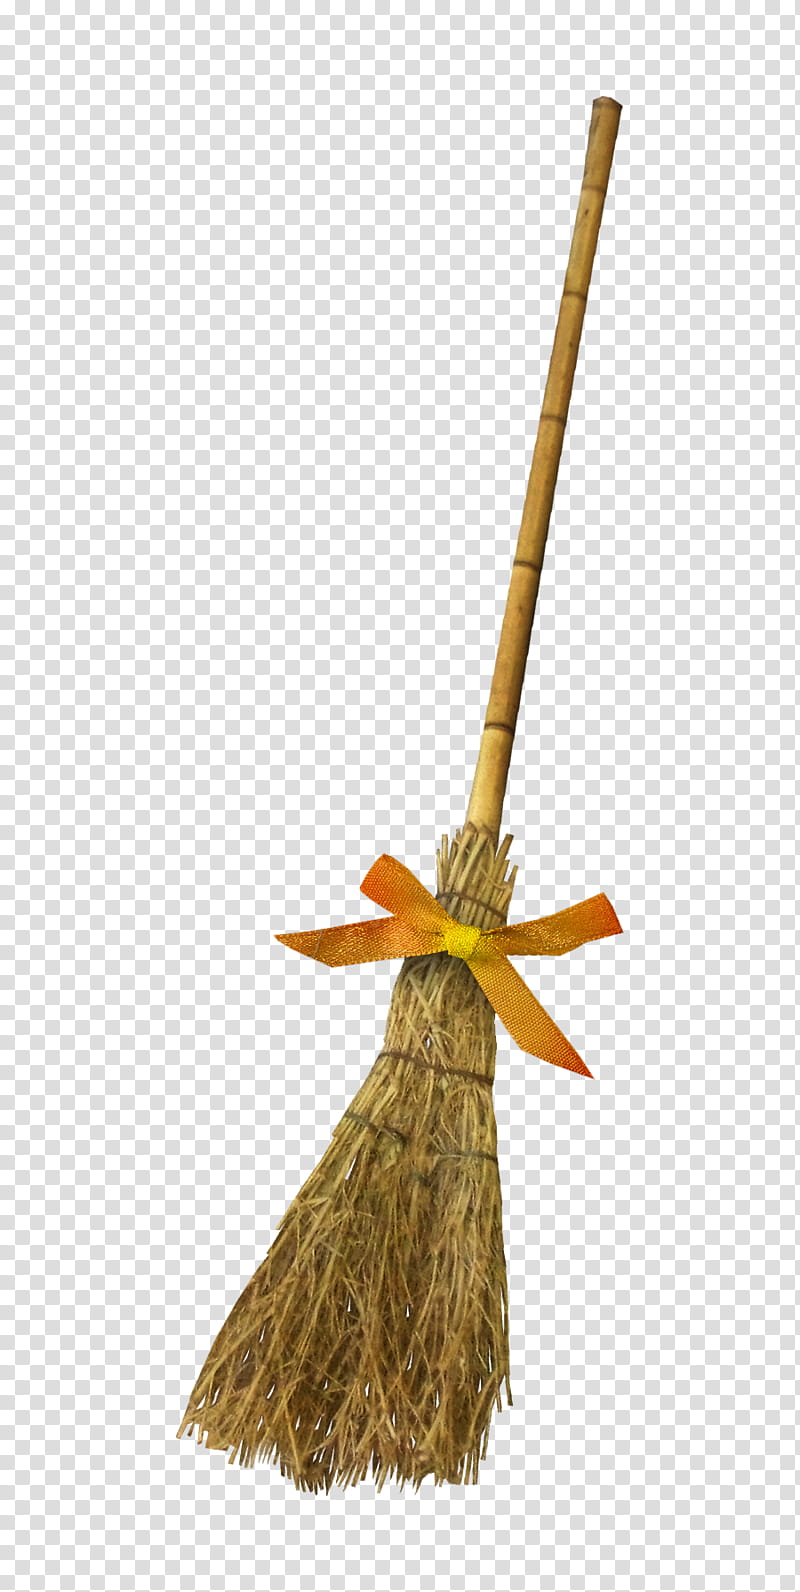 Autumn, brown broomstick isolated on black background transparent background PNG clipart